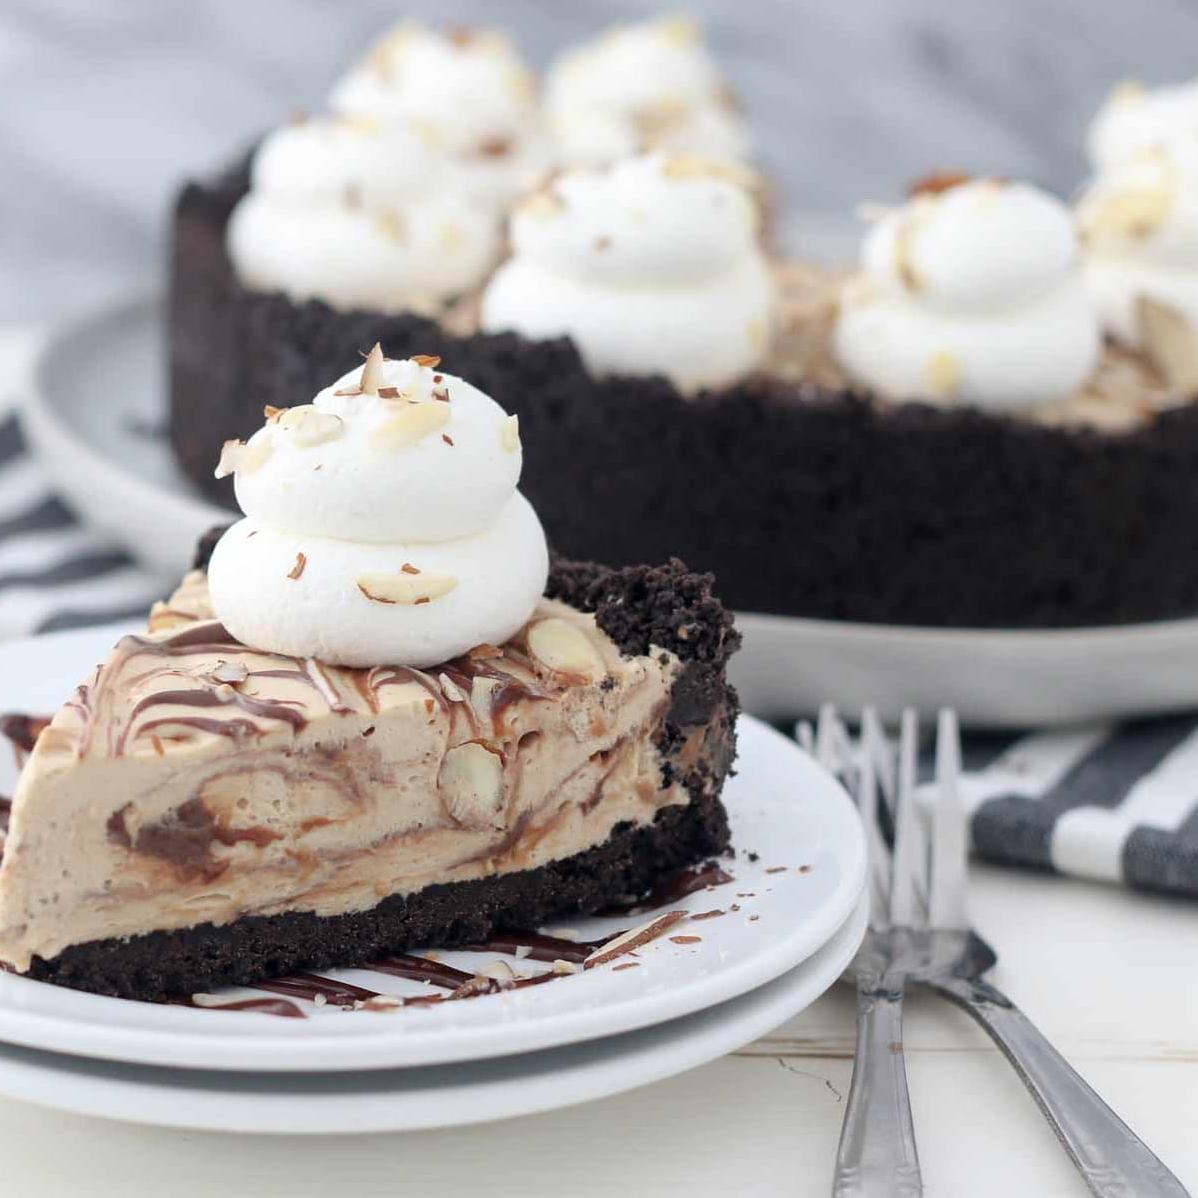  Pies don't have to be boring - try our Mocha Fudge Pie instead!